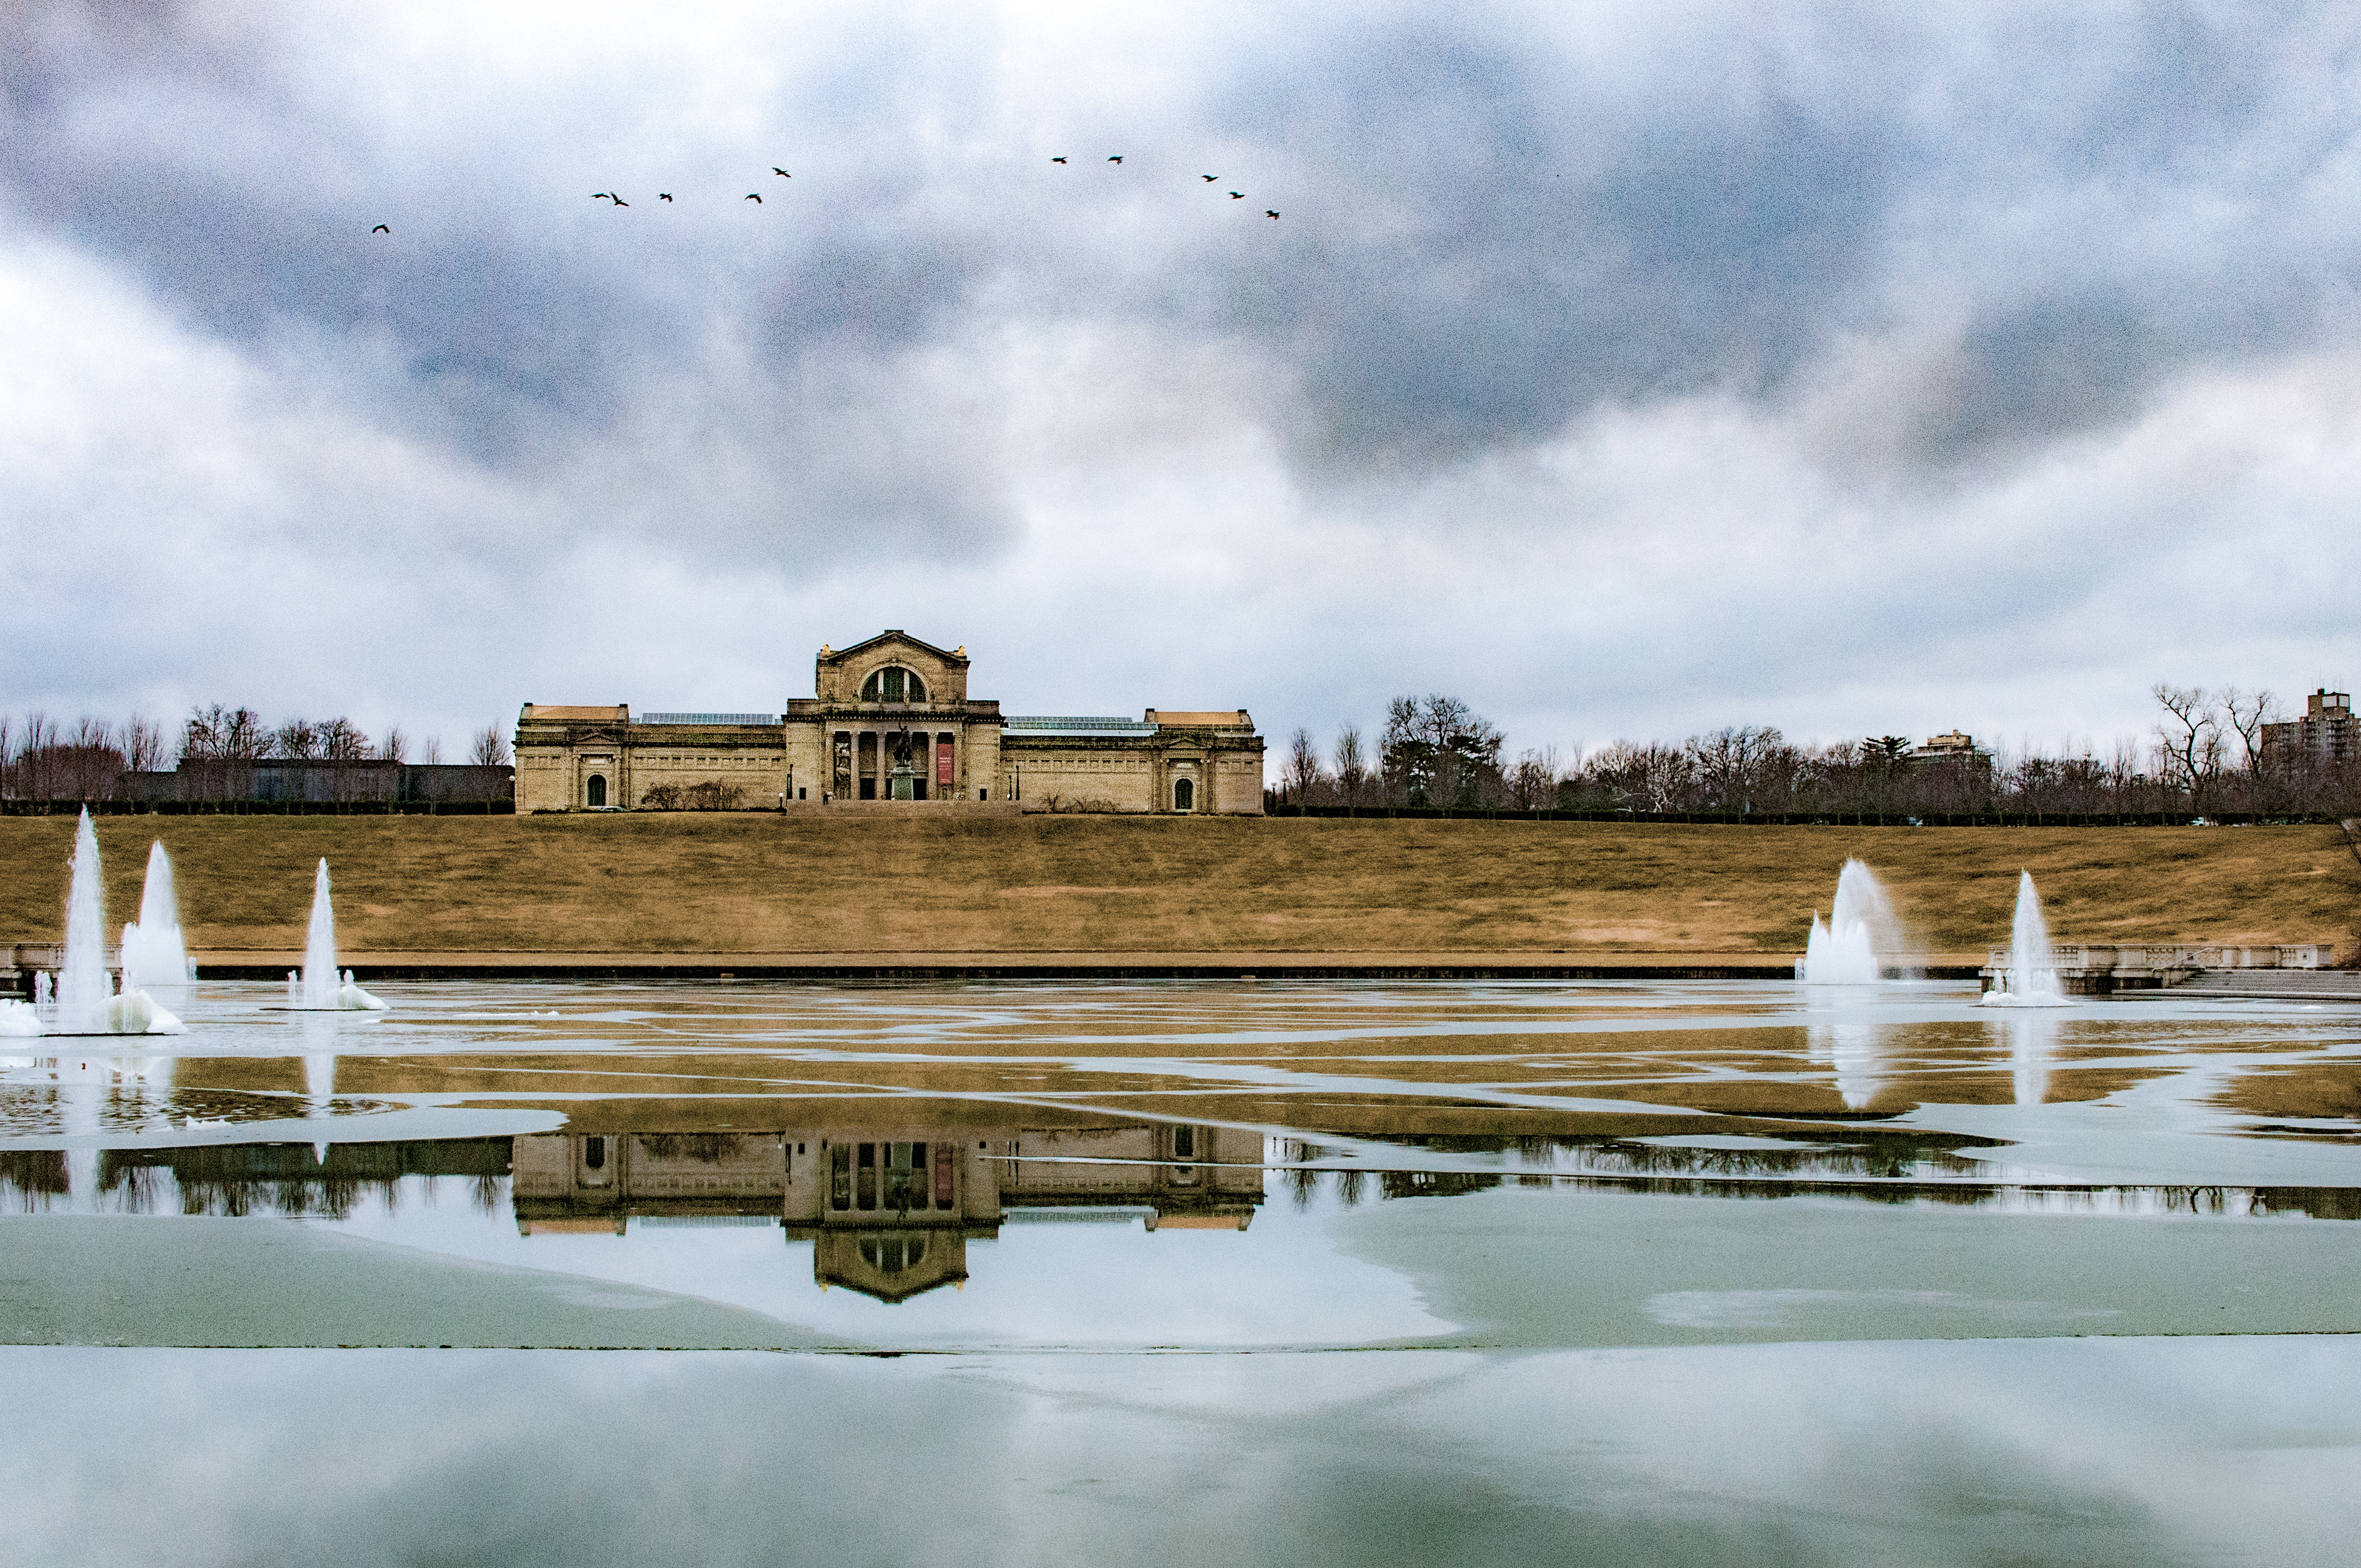 Art Hill in Forest Park in St. Louis Missouri on a frigid winter day.  The Art Museum overlooks the Grand Basin which is completely covered in ice. 